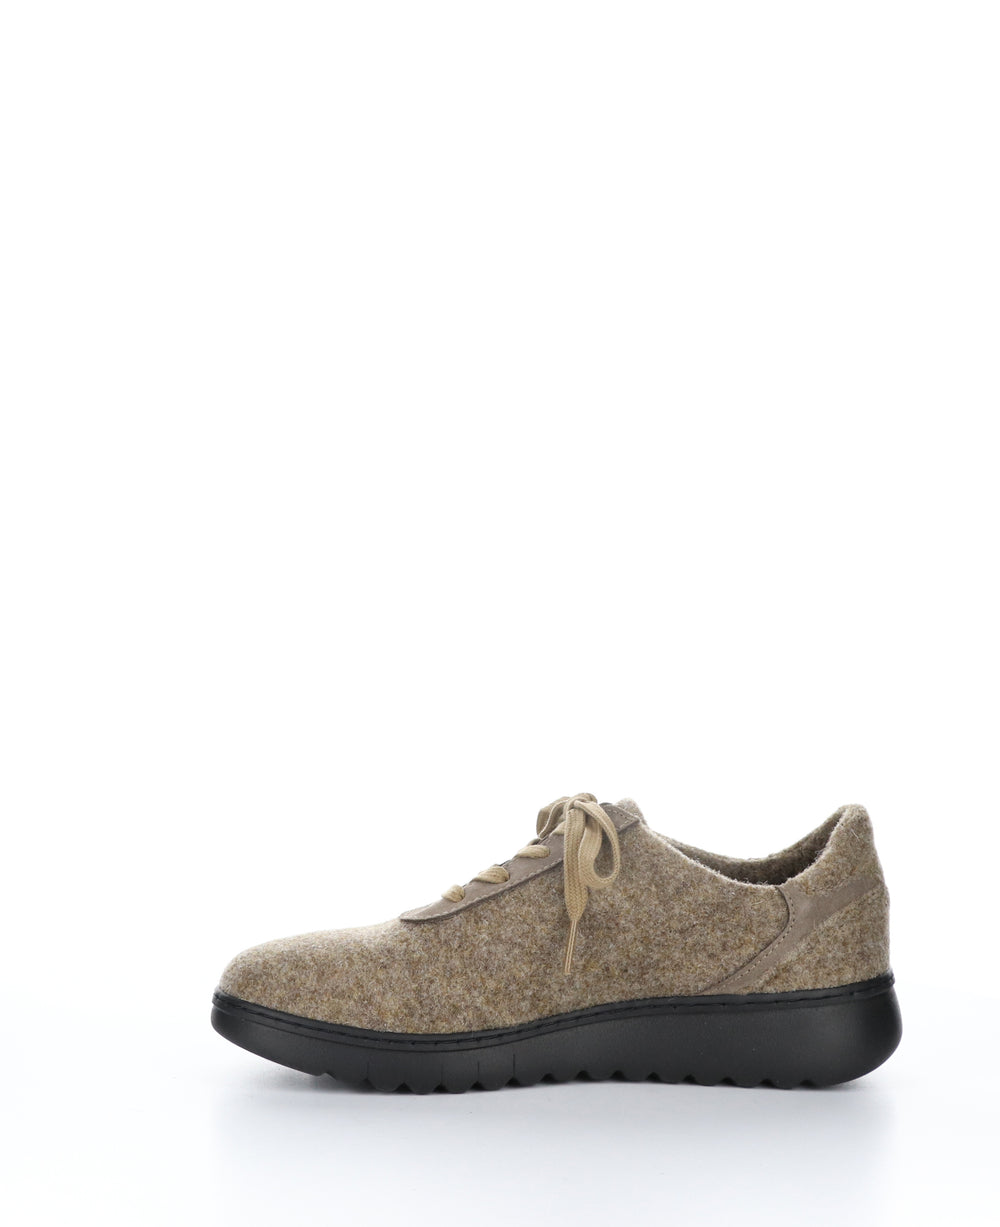 ELRA670SOF Taupe Round Toe Shoes|ELRA670SOF Chaussures à Bout Rond in Marron